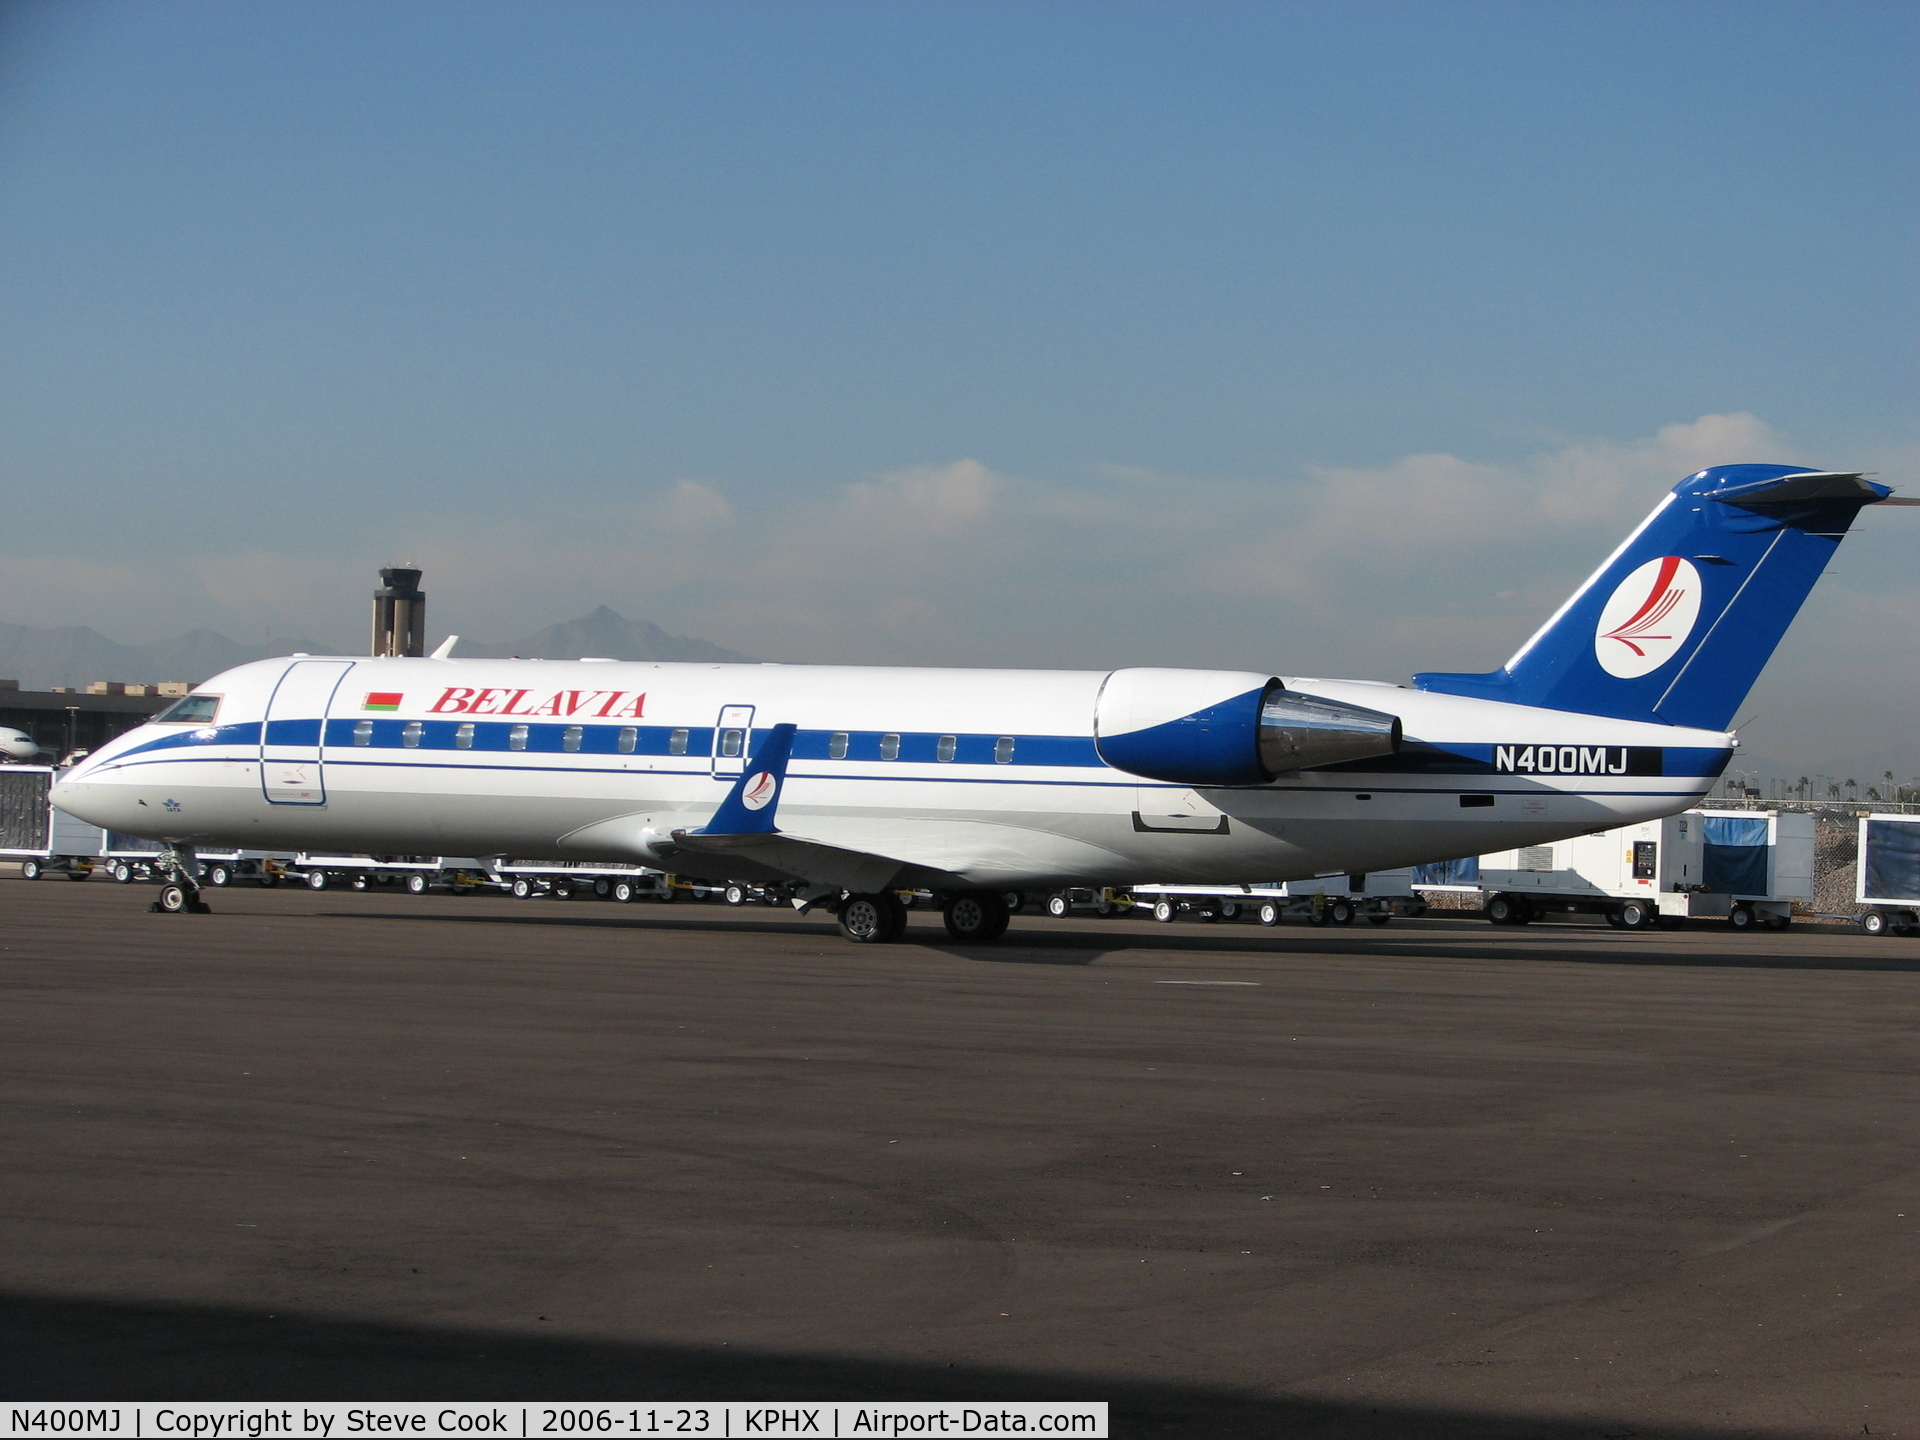 N400MJ, 1999 Bombardier CRJ-100ER (CL-600-2B19) C/N 7309, recently painted in Belavia colors at KGYR